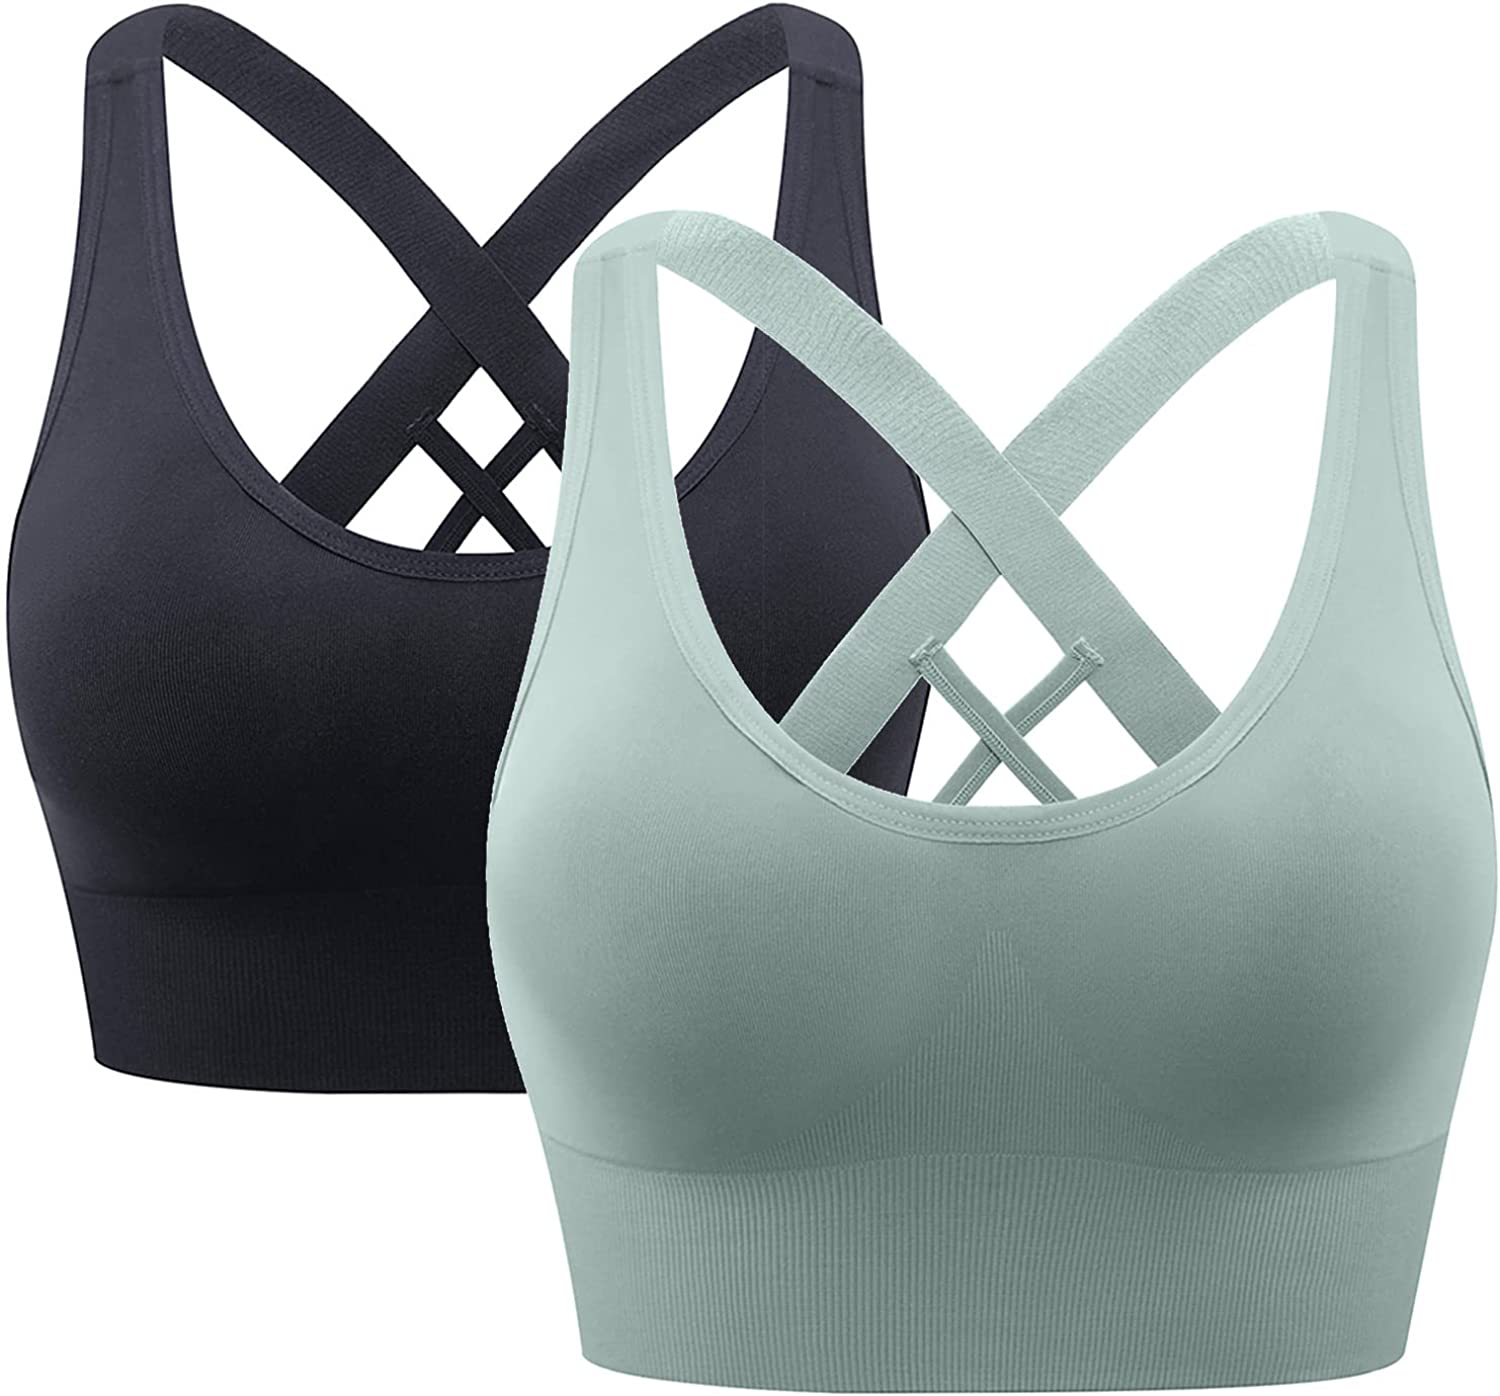 Buy ALAXENDER Women's Sports Bra Cross Back Tops for Running Fitness  Removable Padded Workout Yoga BrasFree Size (28 Till 32) (C, Black) at